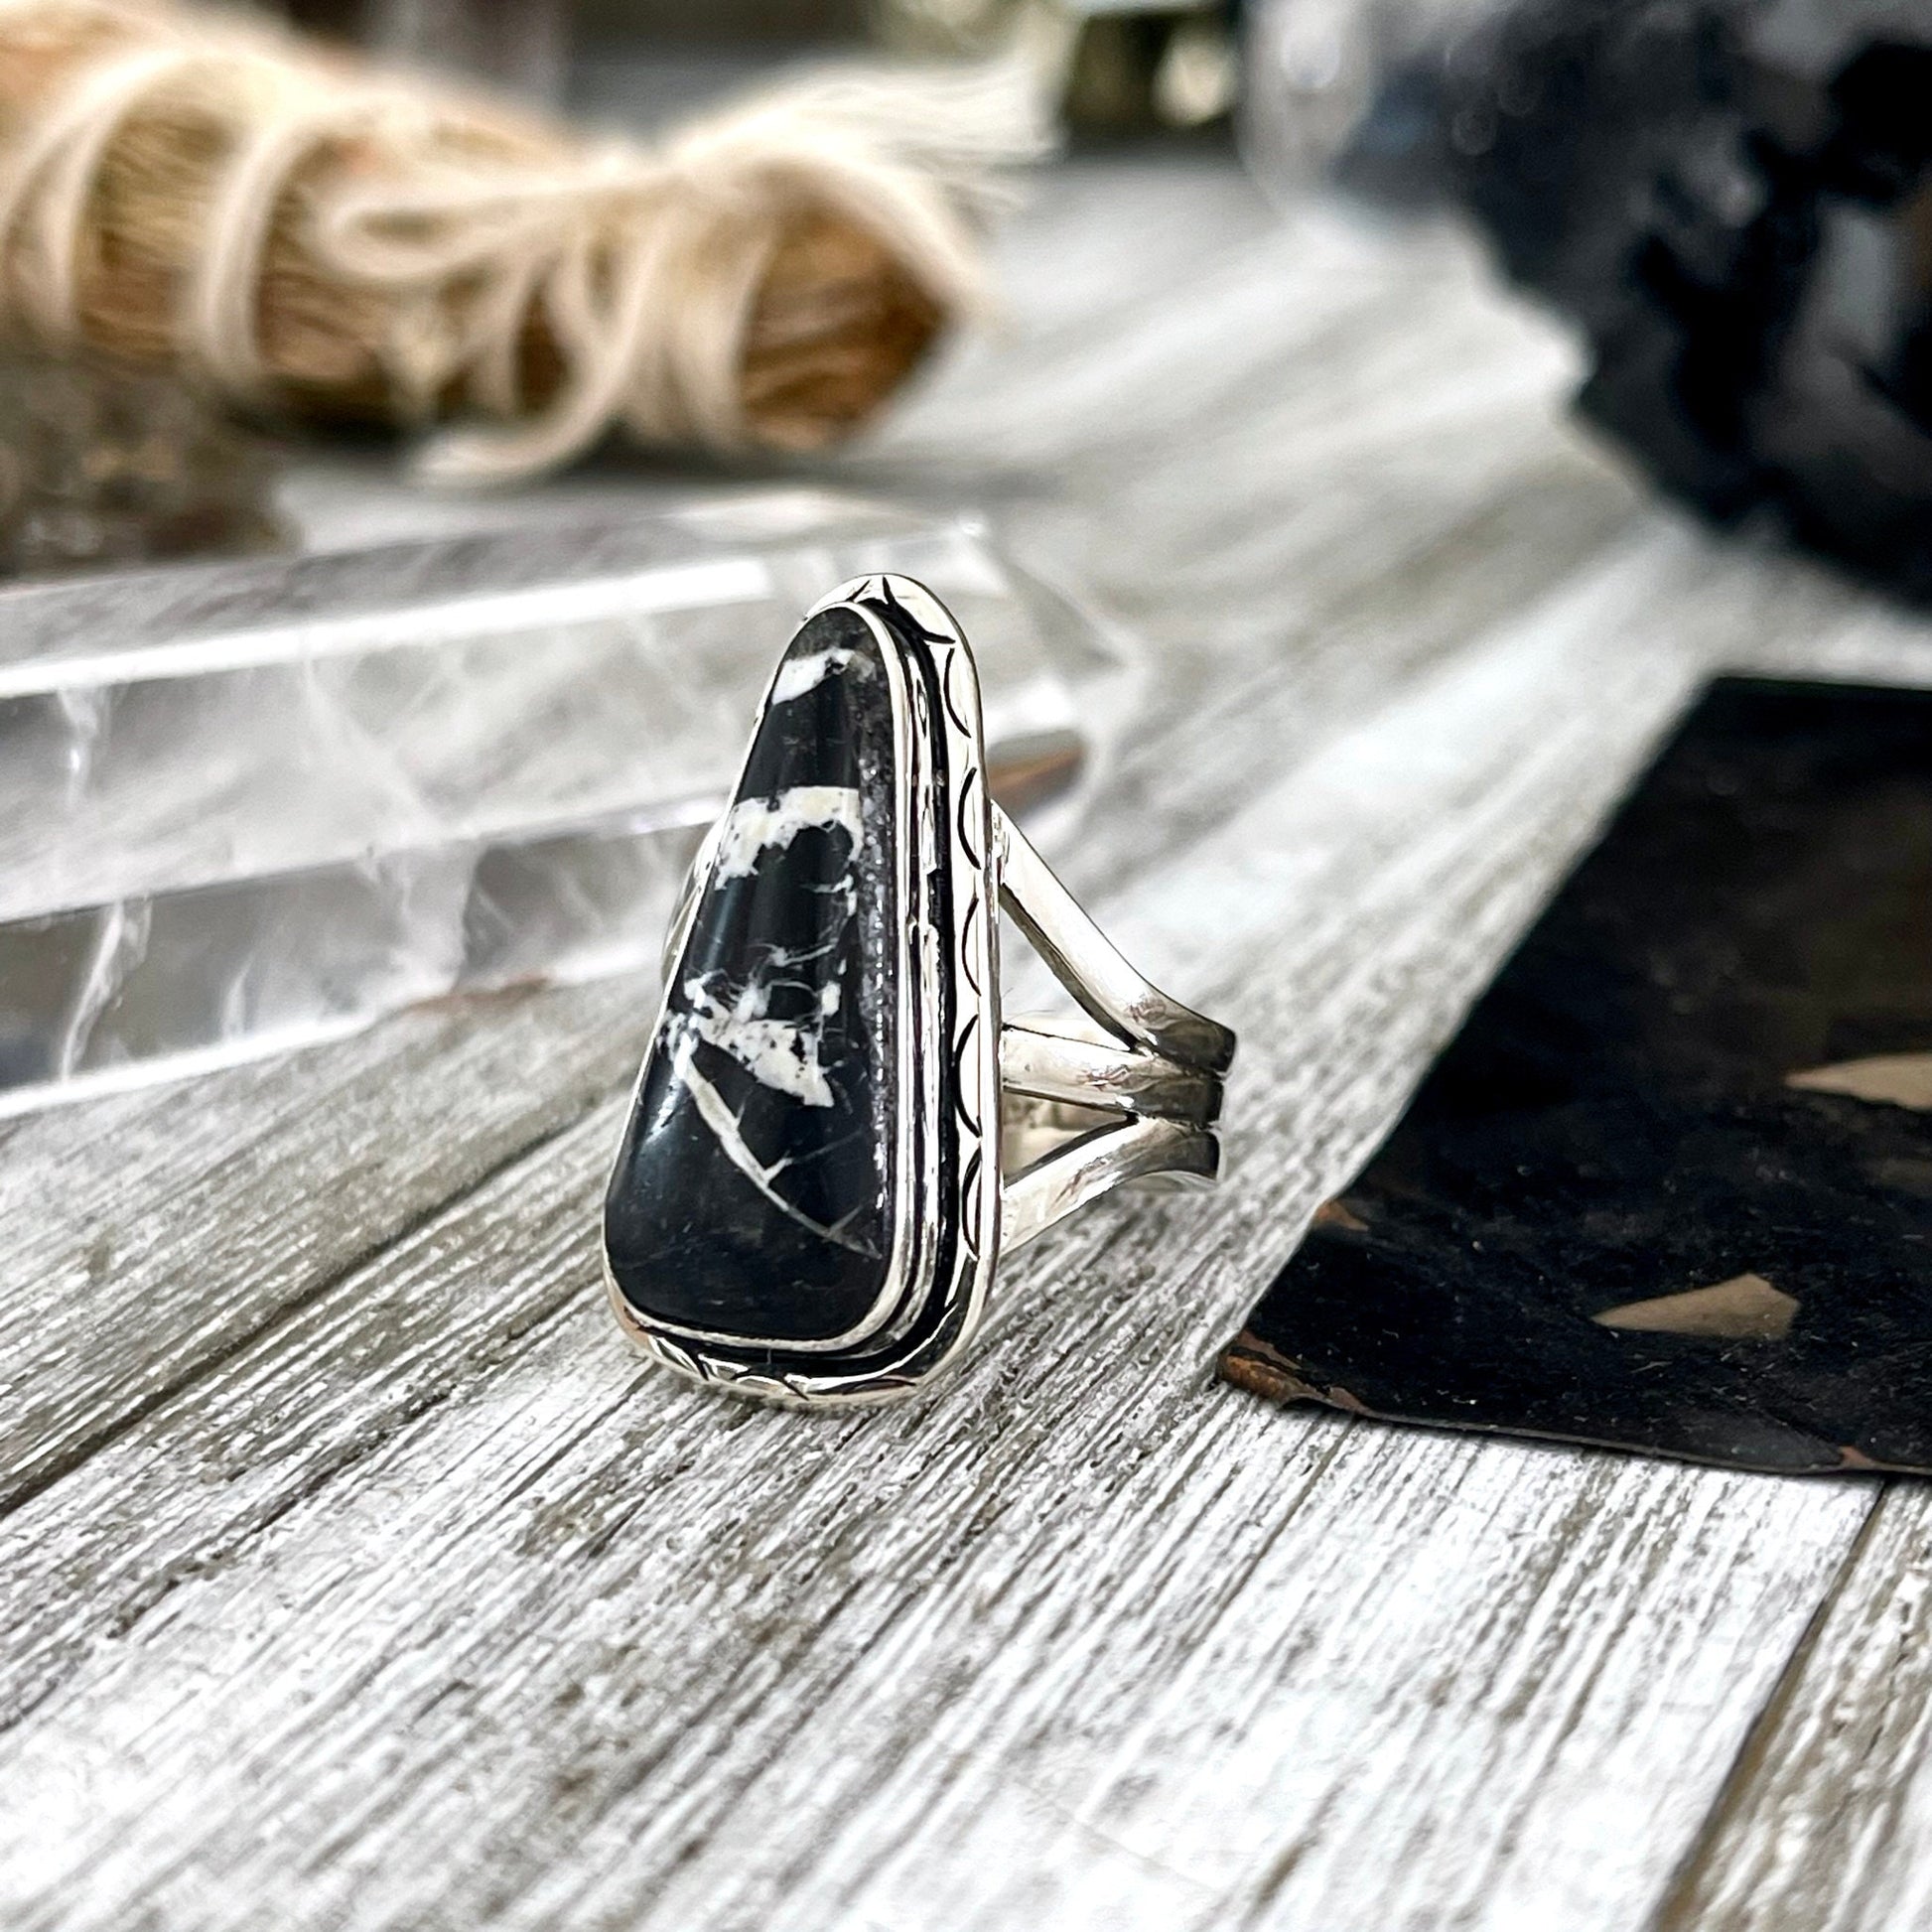 Size 6 Stunning White Buffalo Statement Ring Set in Sterling Silver / Curated by FOXLARK Collection - Foxlark Crystal Jewelry